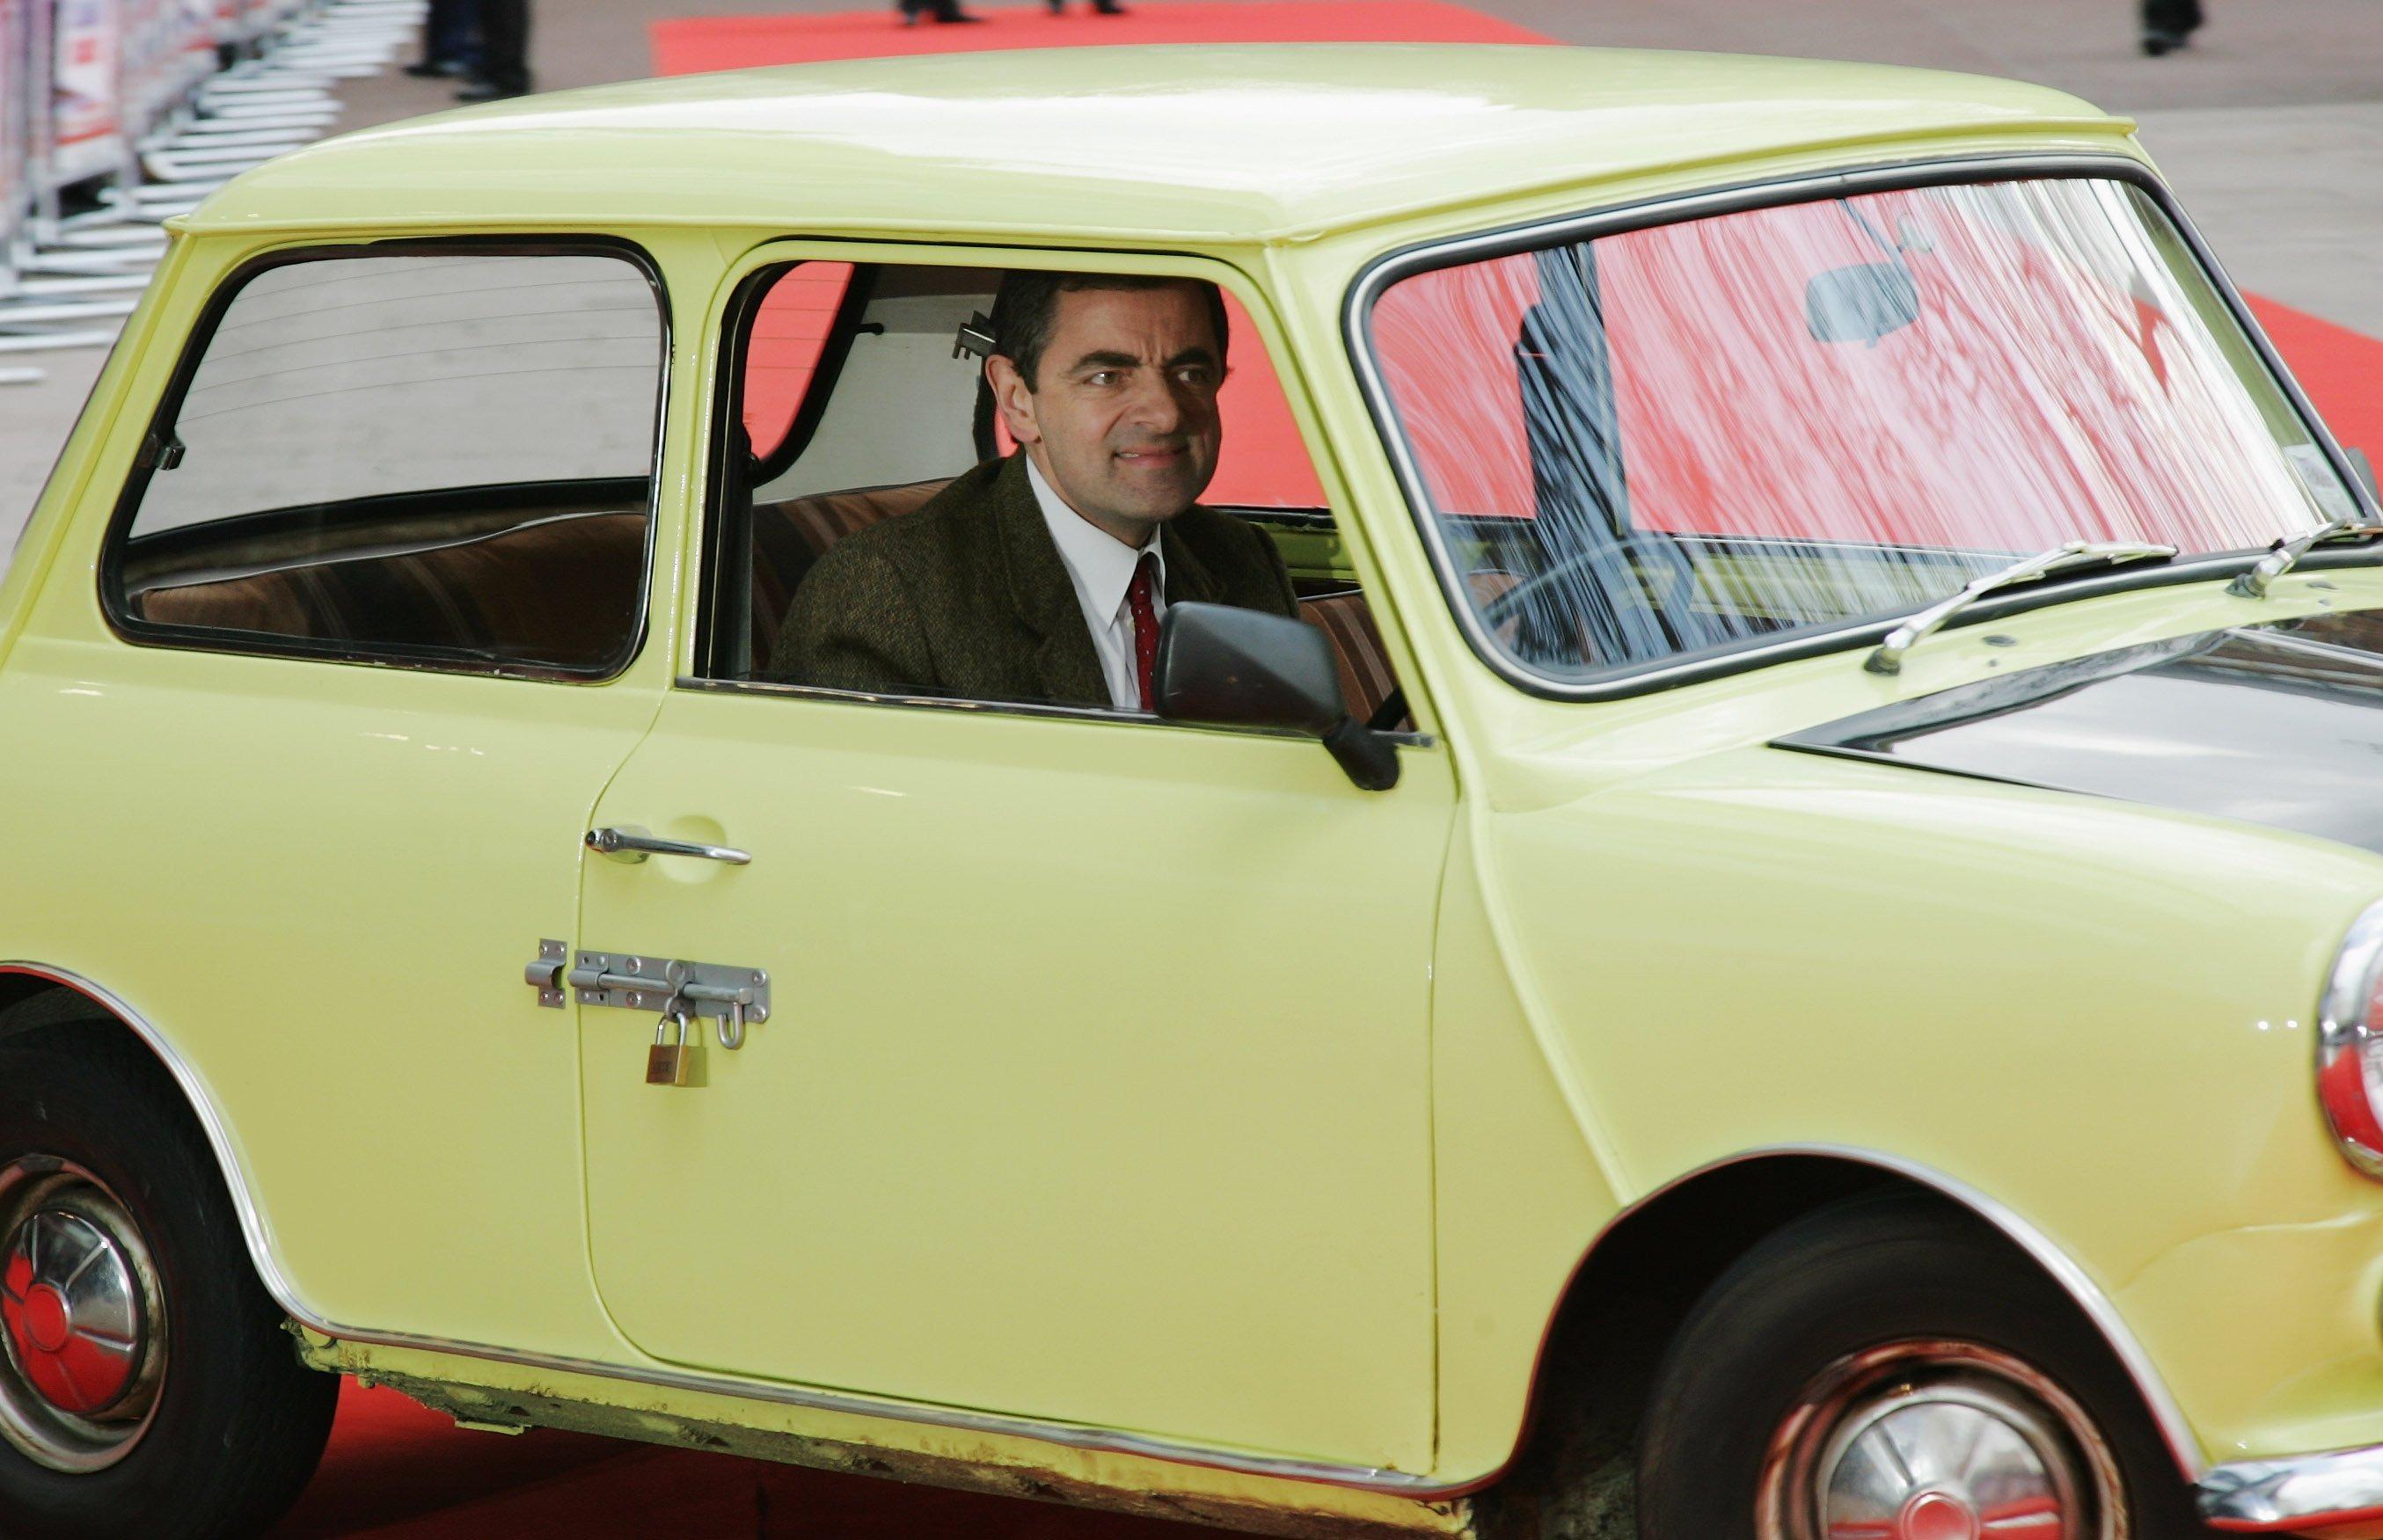 lamtac discover mr bean s iconic million classic mini that has been associated with the childhoods of millions of people around the world 655cc31da6557 Discover Mr. Bean's Iconic $101 Million Classic Mini 1000 That Has Been Associated With The Childhoods Of Millions Of People Around The World.